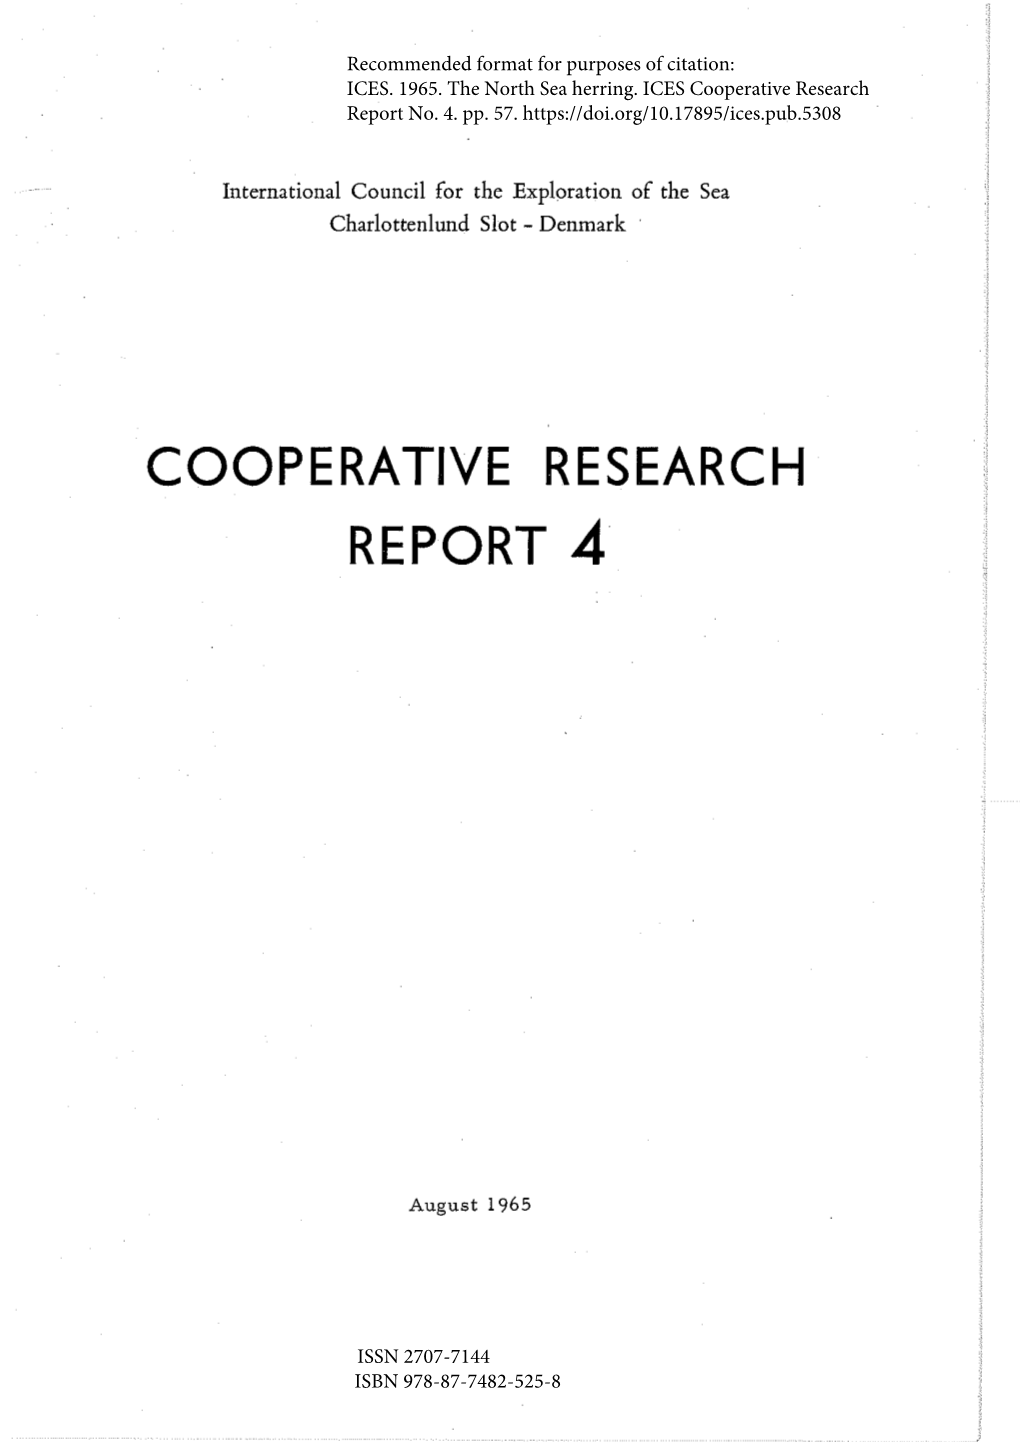 Cooperative Research Report 4